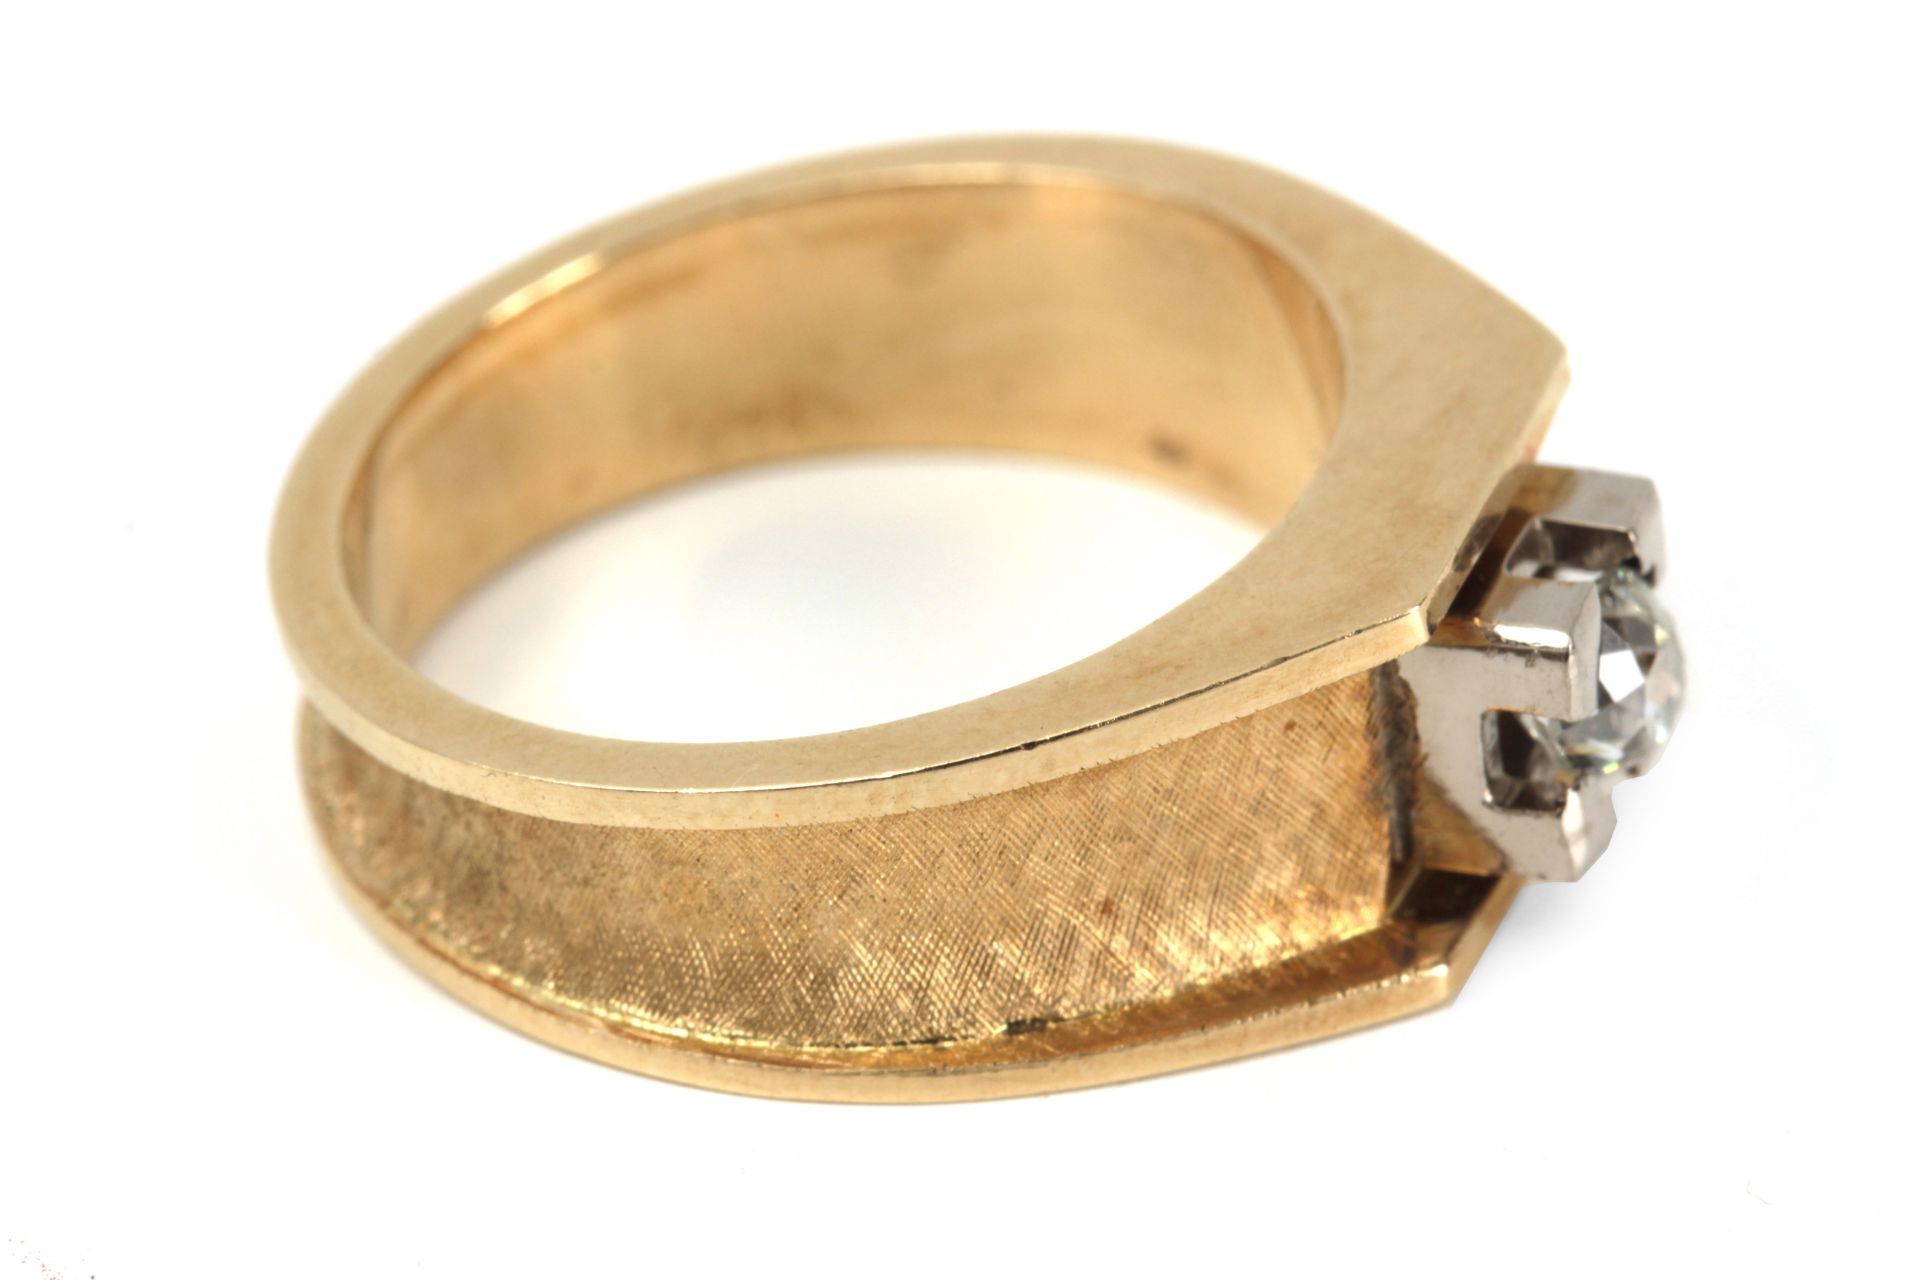 A 0,38 ct. old European cut diamond solitaire ring with an 18k. yellow gold and platinum setting - Image 2 of 4